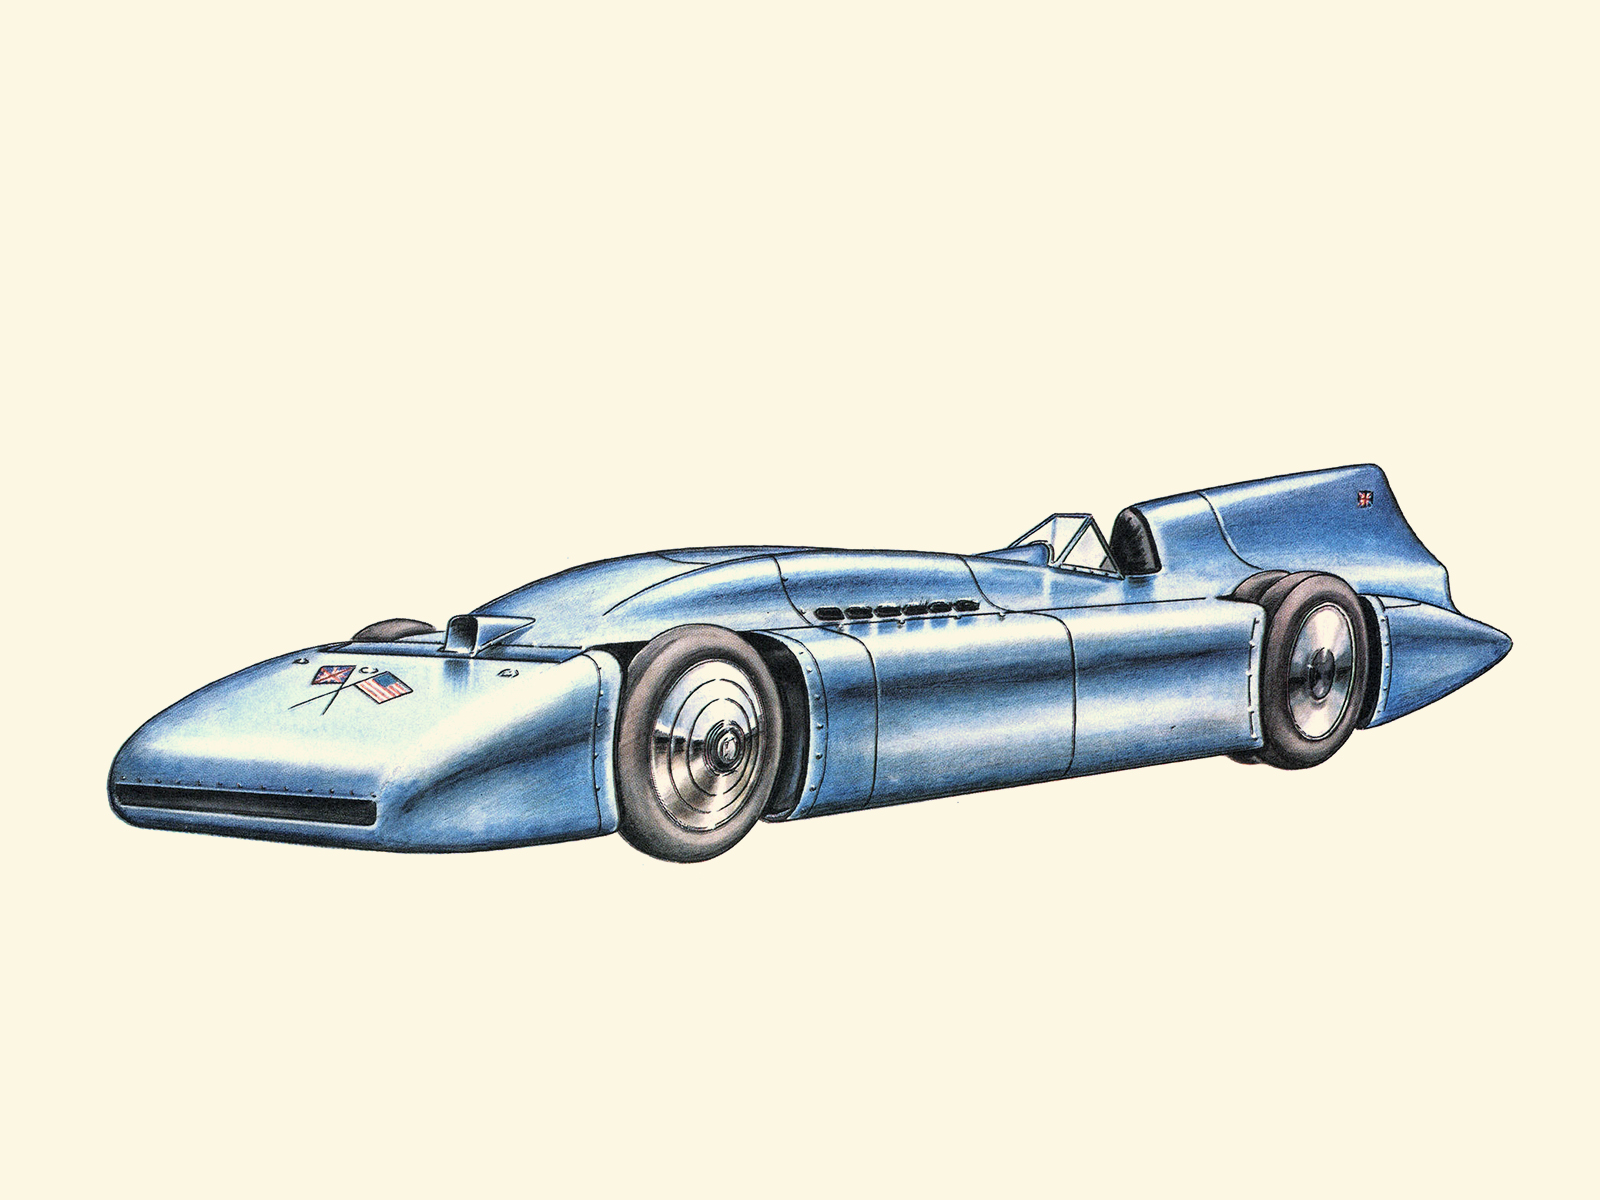 1935 Rolls-Royce Campbell 'Bluebird' (M. Campbell 276.82/301.13 mph): Illustrated by Piet Olyslager